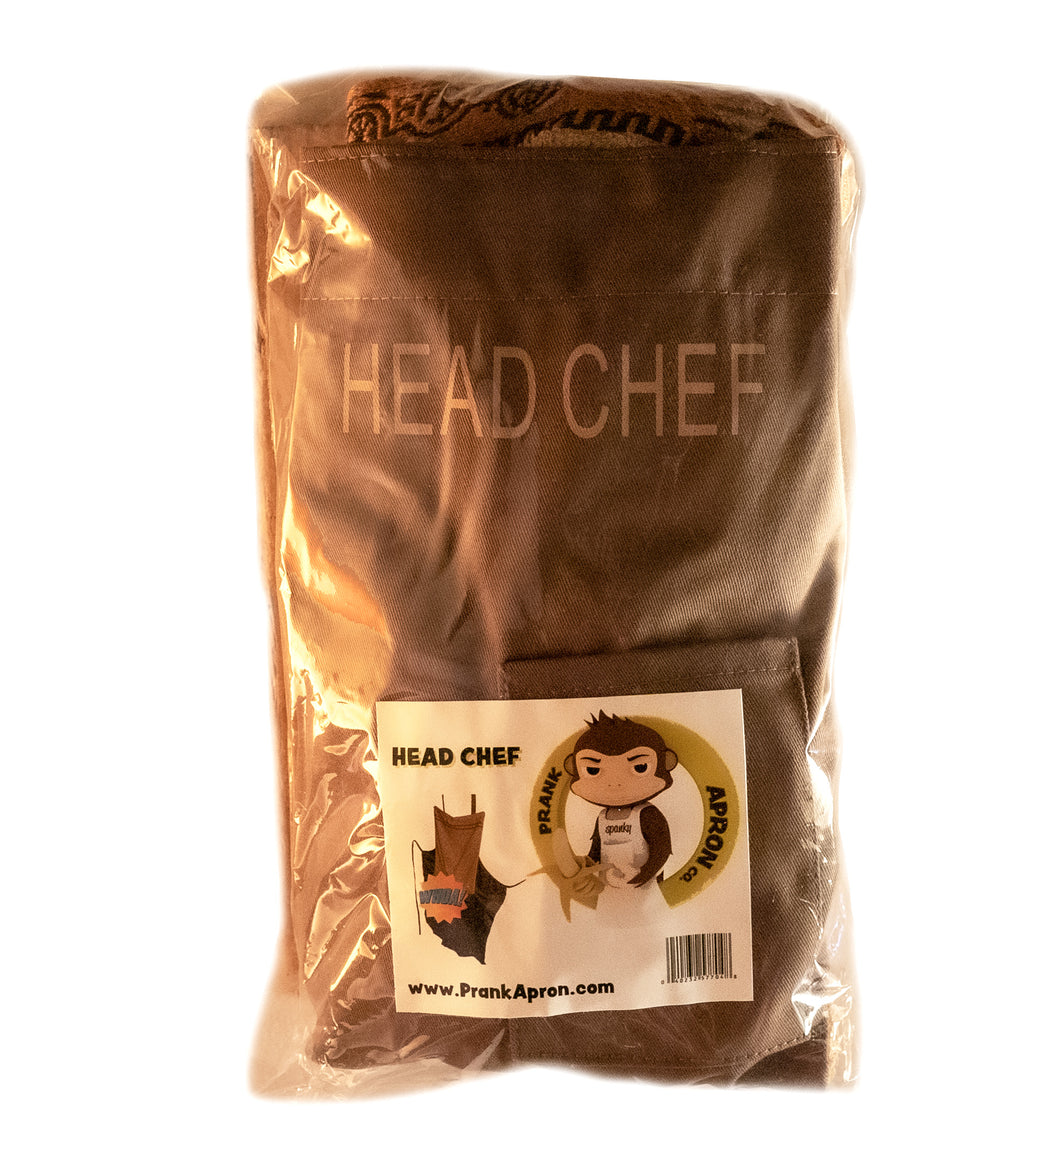 The HEAD CHEF Prank Apron - GREAT GAG GIFT FOR DAD